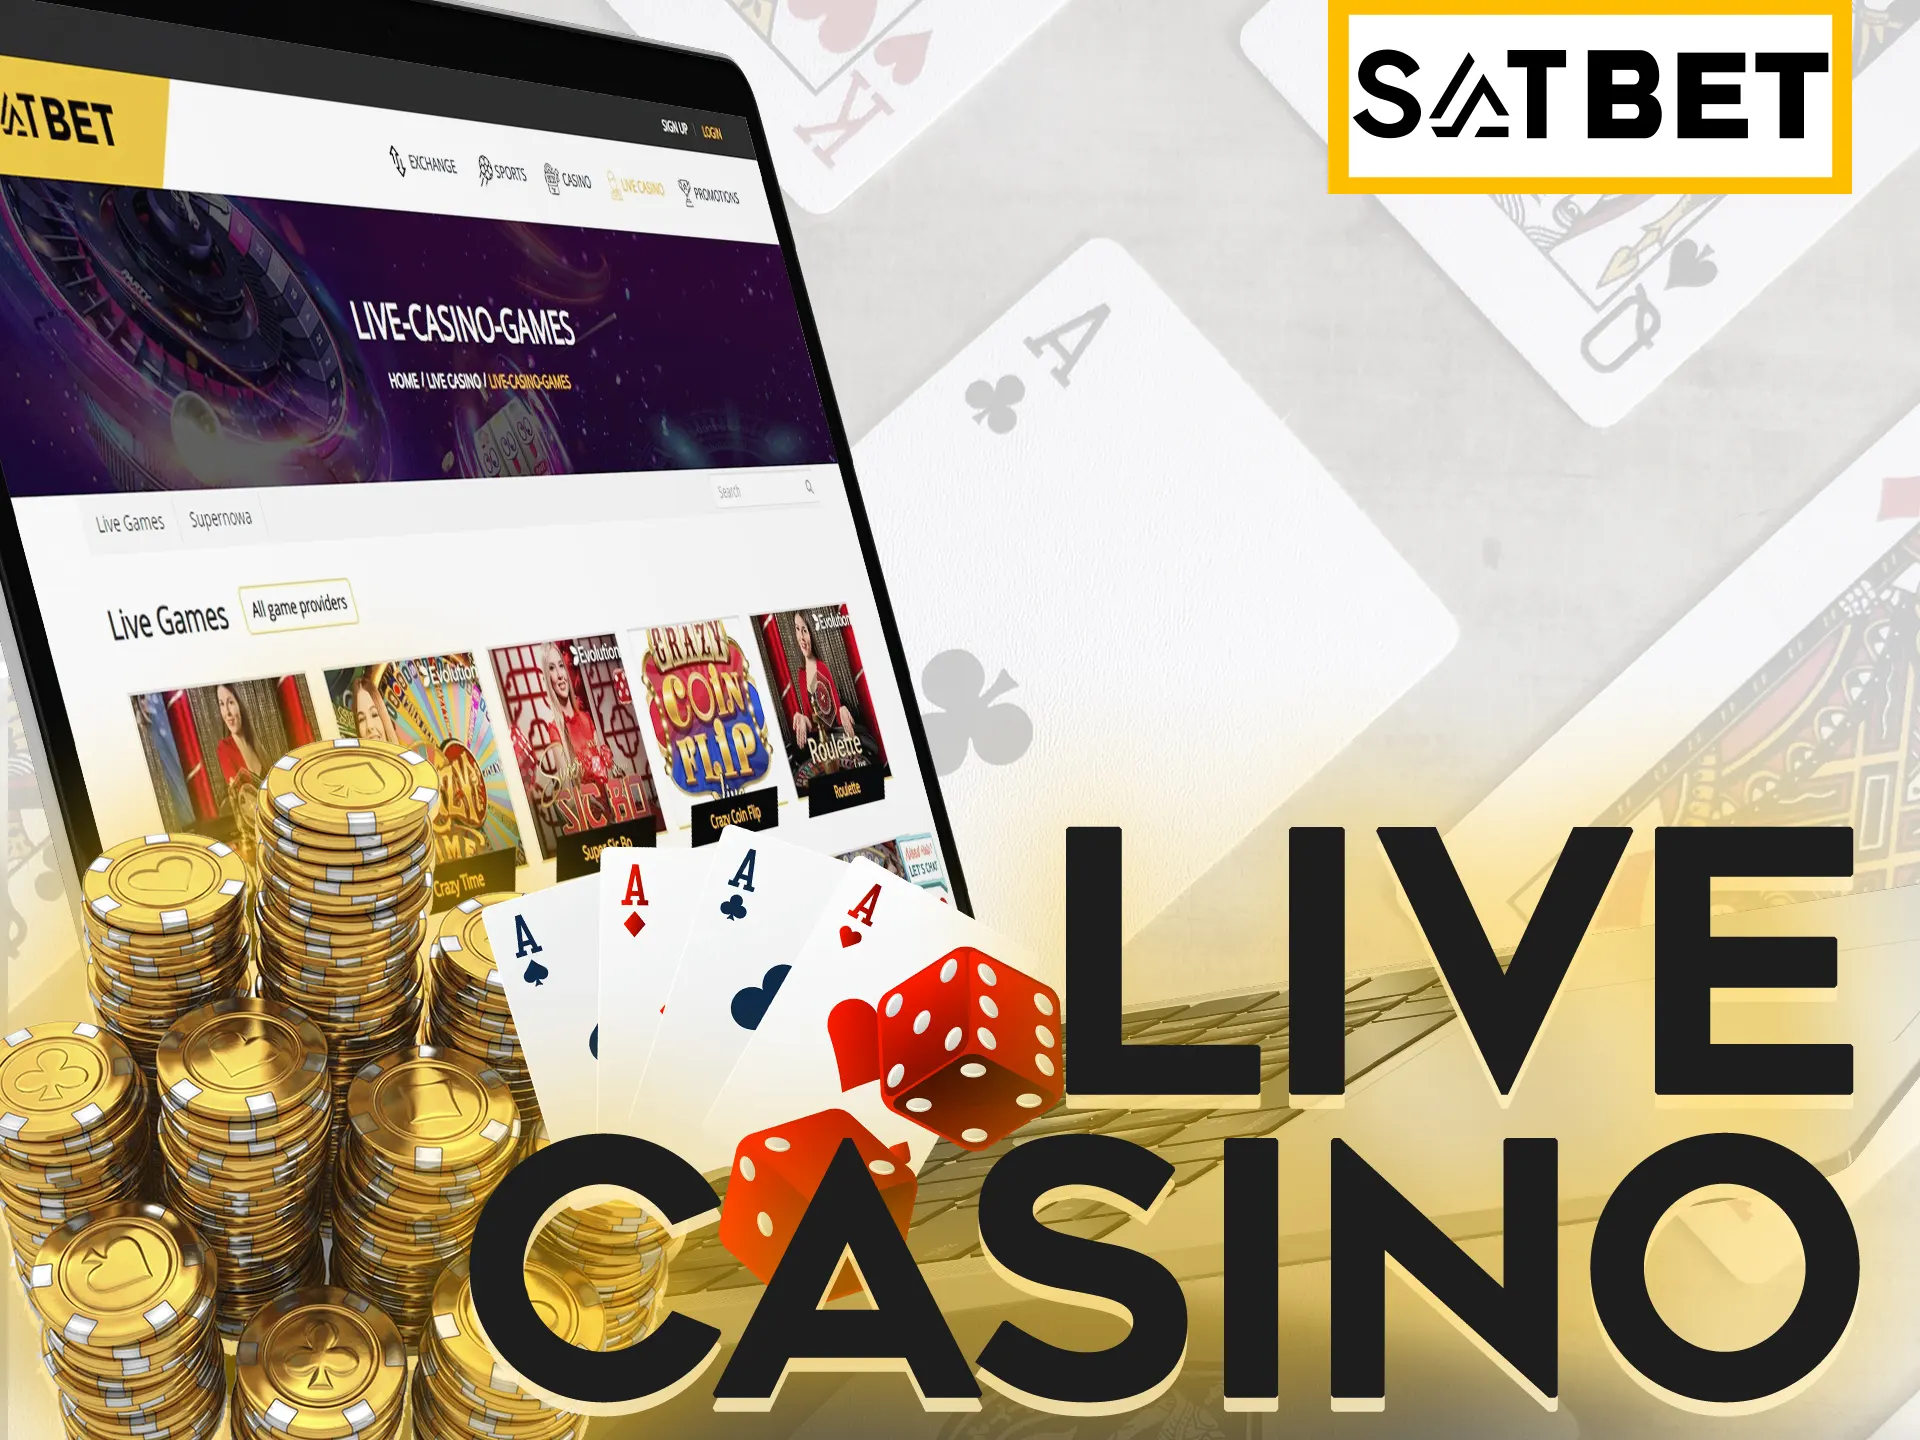 Play with real people at Satbet casino.